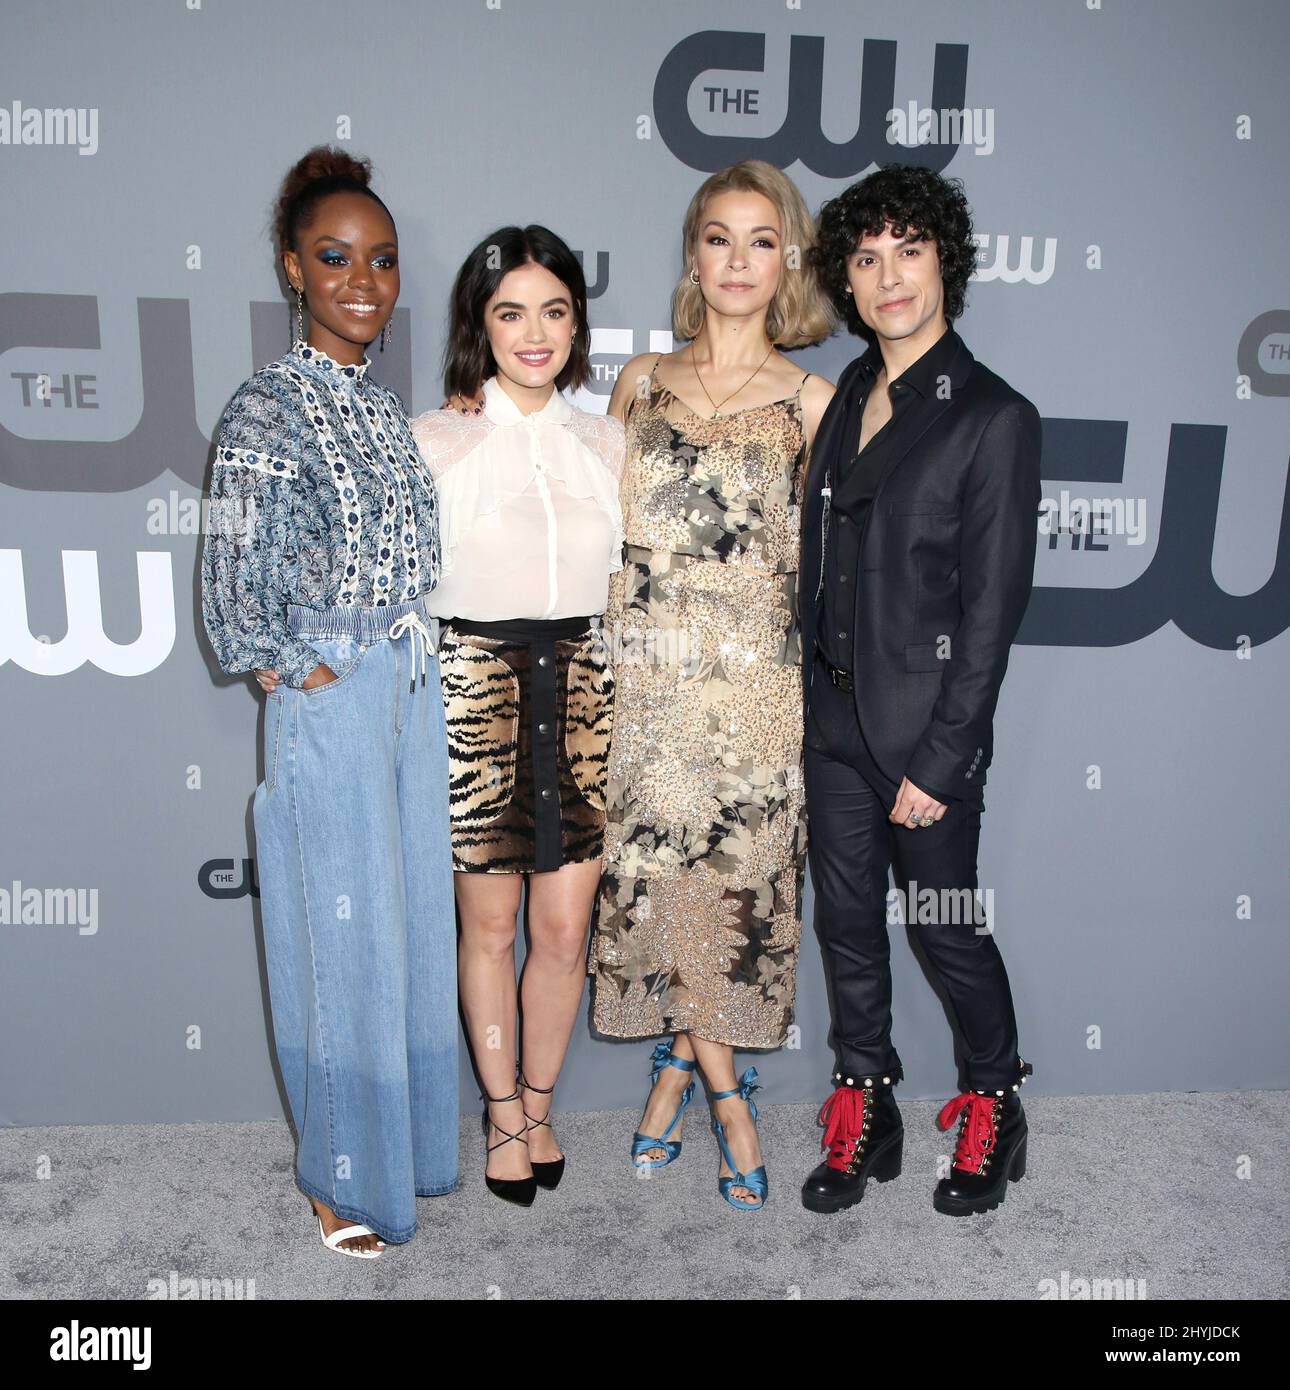 Ashleigh Murra, Lucy Hale, Julia Chan & Jonny Beauchamp attending The CW Network 2019 Upfront held at New York City Center on May 16, 2019 in New York City, USA. Stock Photo